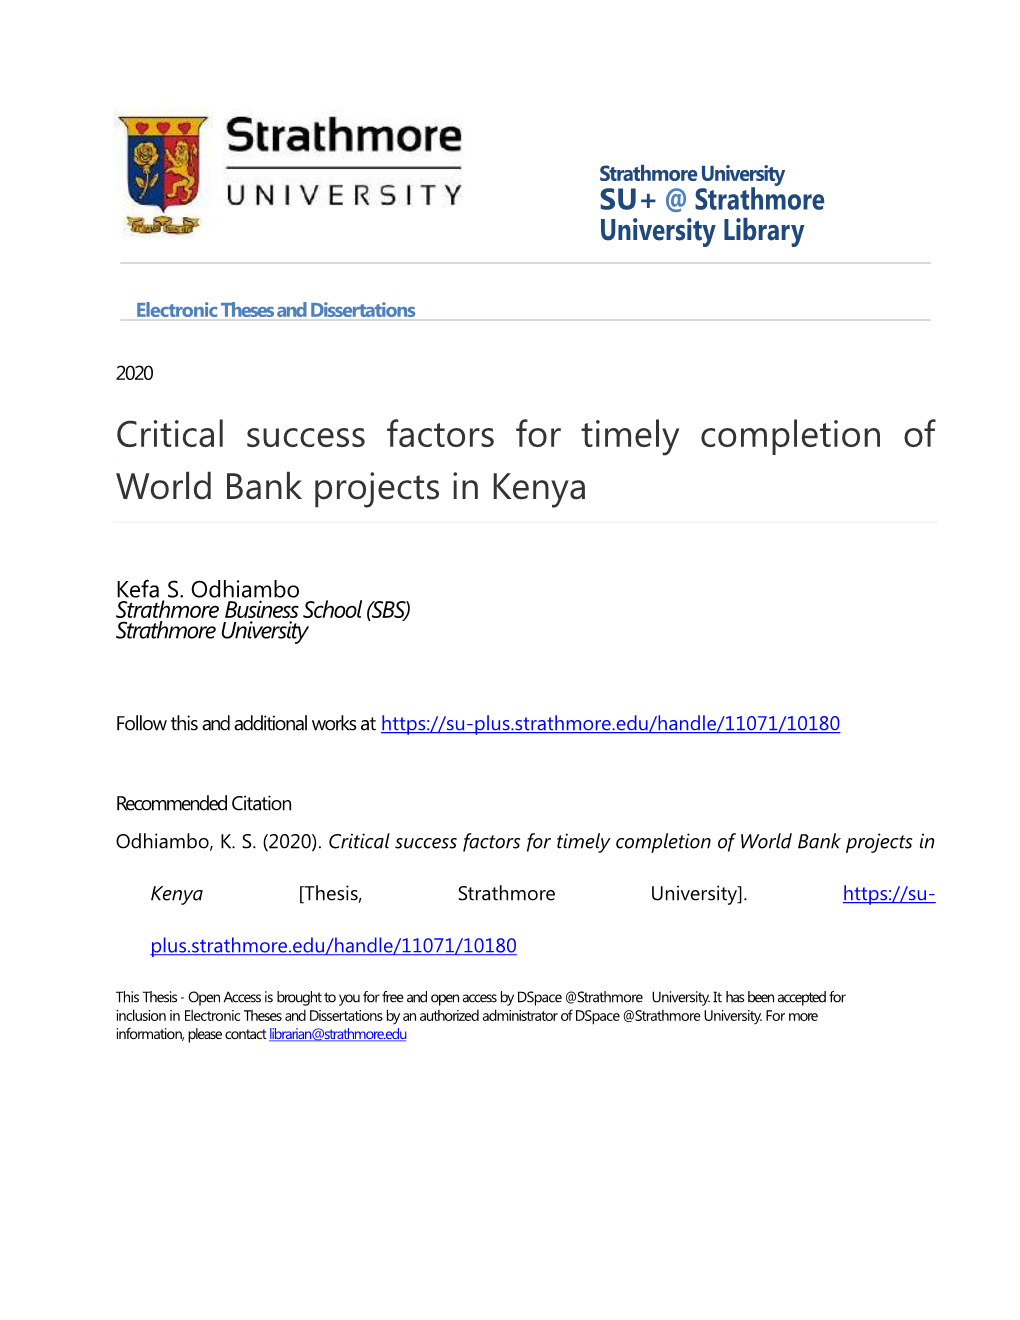 Critical Success Factors for Timely Completion of World Bank Projects in Kenya